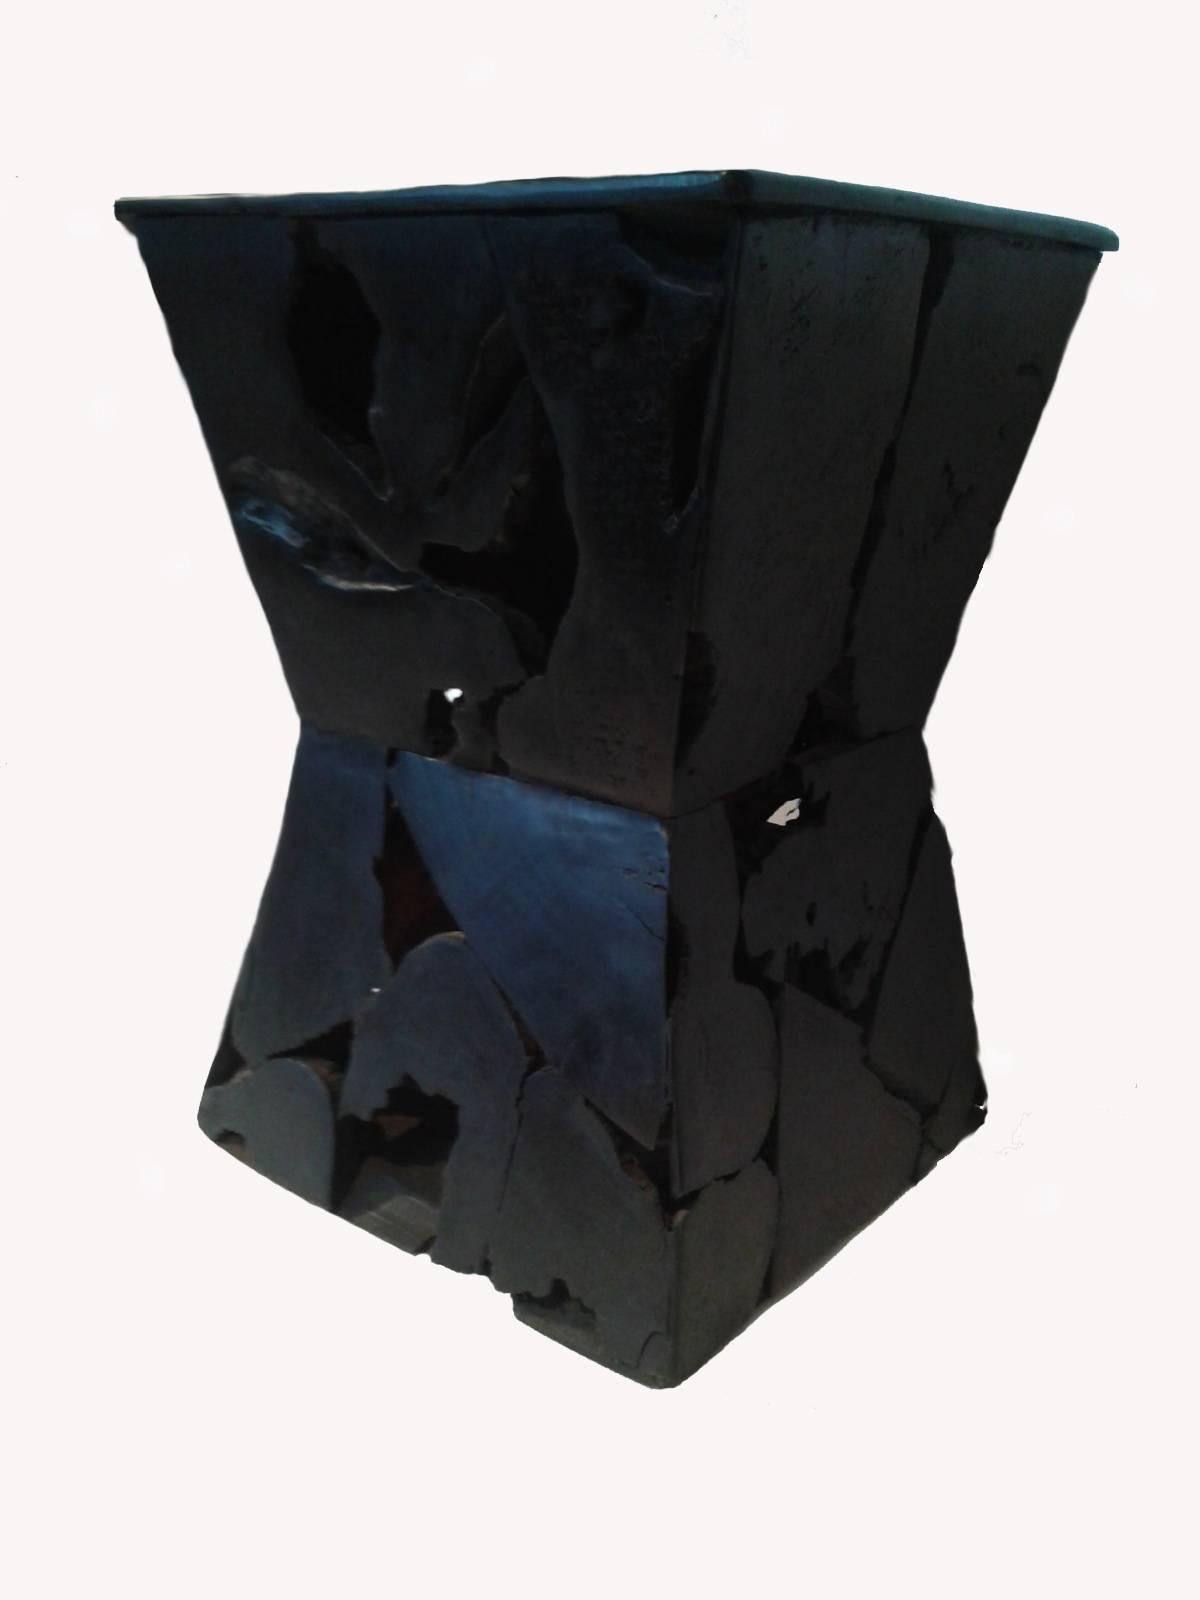 An hourglass shaped end table, carved out of strong black wood, from Indonesia. With its singular mosaic pattern, this original table is the perfect accent for modern, eclectic decor. Solid construction, polished top. Excellent vintage condition.